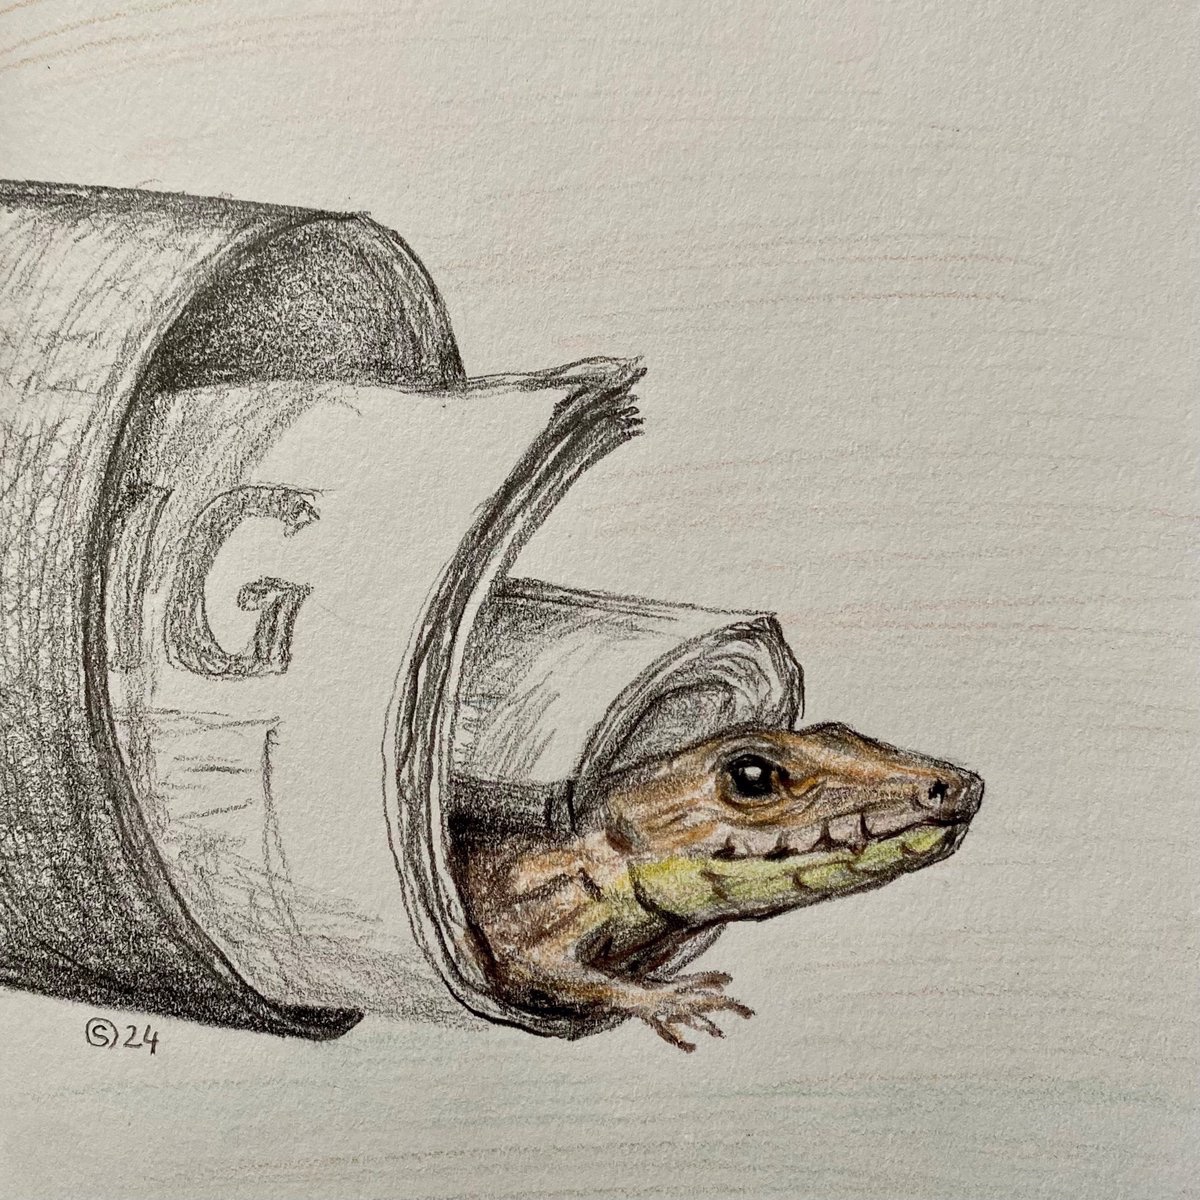 This is a true story:‼️ One morning, when I picked up the newspaper, there was a #lizard hiding in it! N is for #Newspaper in #Monday‘s #AnimalAlphabets @AnimalAlphabets #drawing #art #animals #illustration #MondayMood #kleinekunstklasse #zeitung #eidechse #MondayMotivation